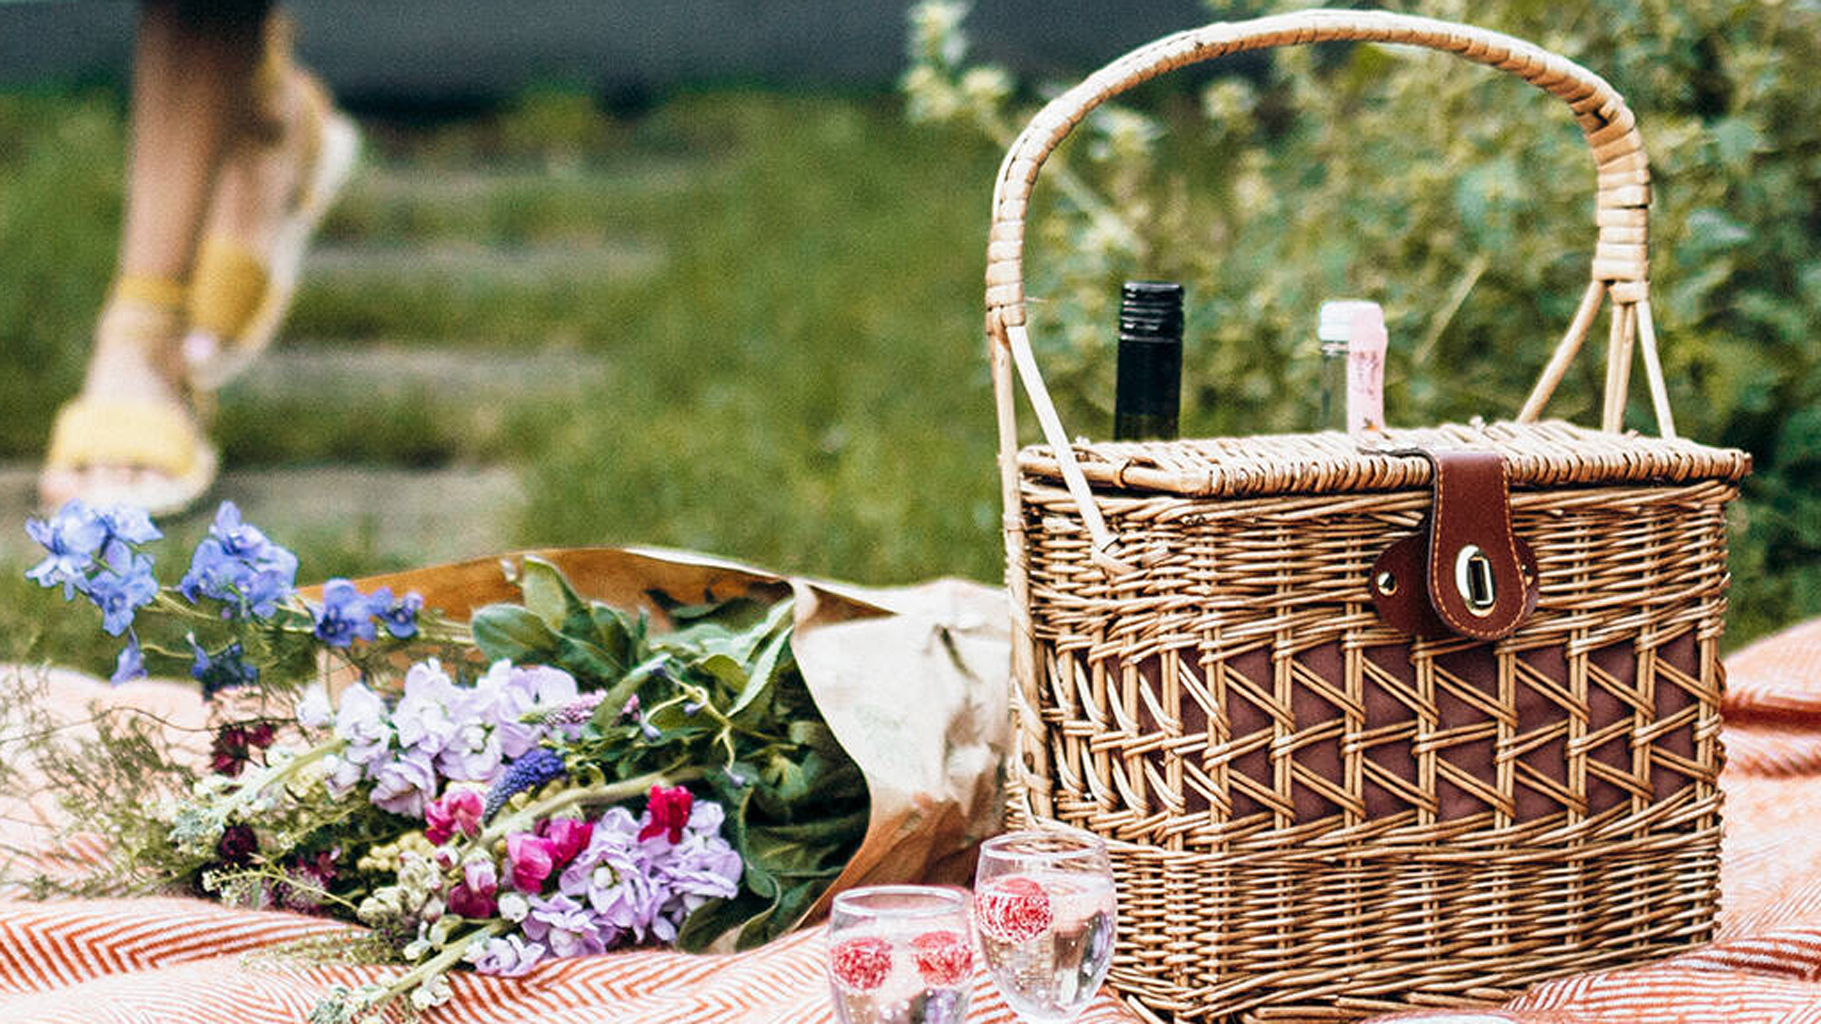 Ceramic Plates Wicker Picnic Basket Set Stainless Steel Silverware Bottle Opener S/P Shakers Built-in Cooler Wine Glasses 2 Person Deluxe Vintage Style Woven Willow Picnic Hamper Cherry 